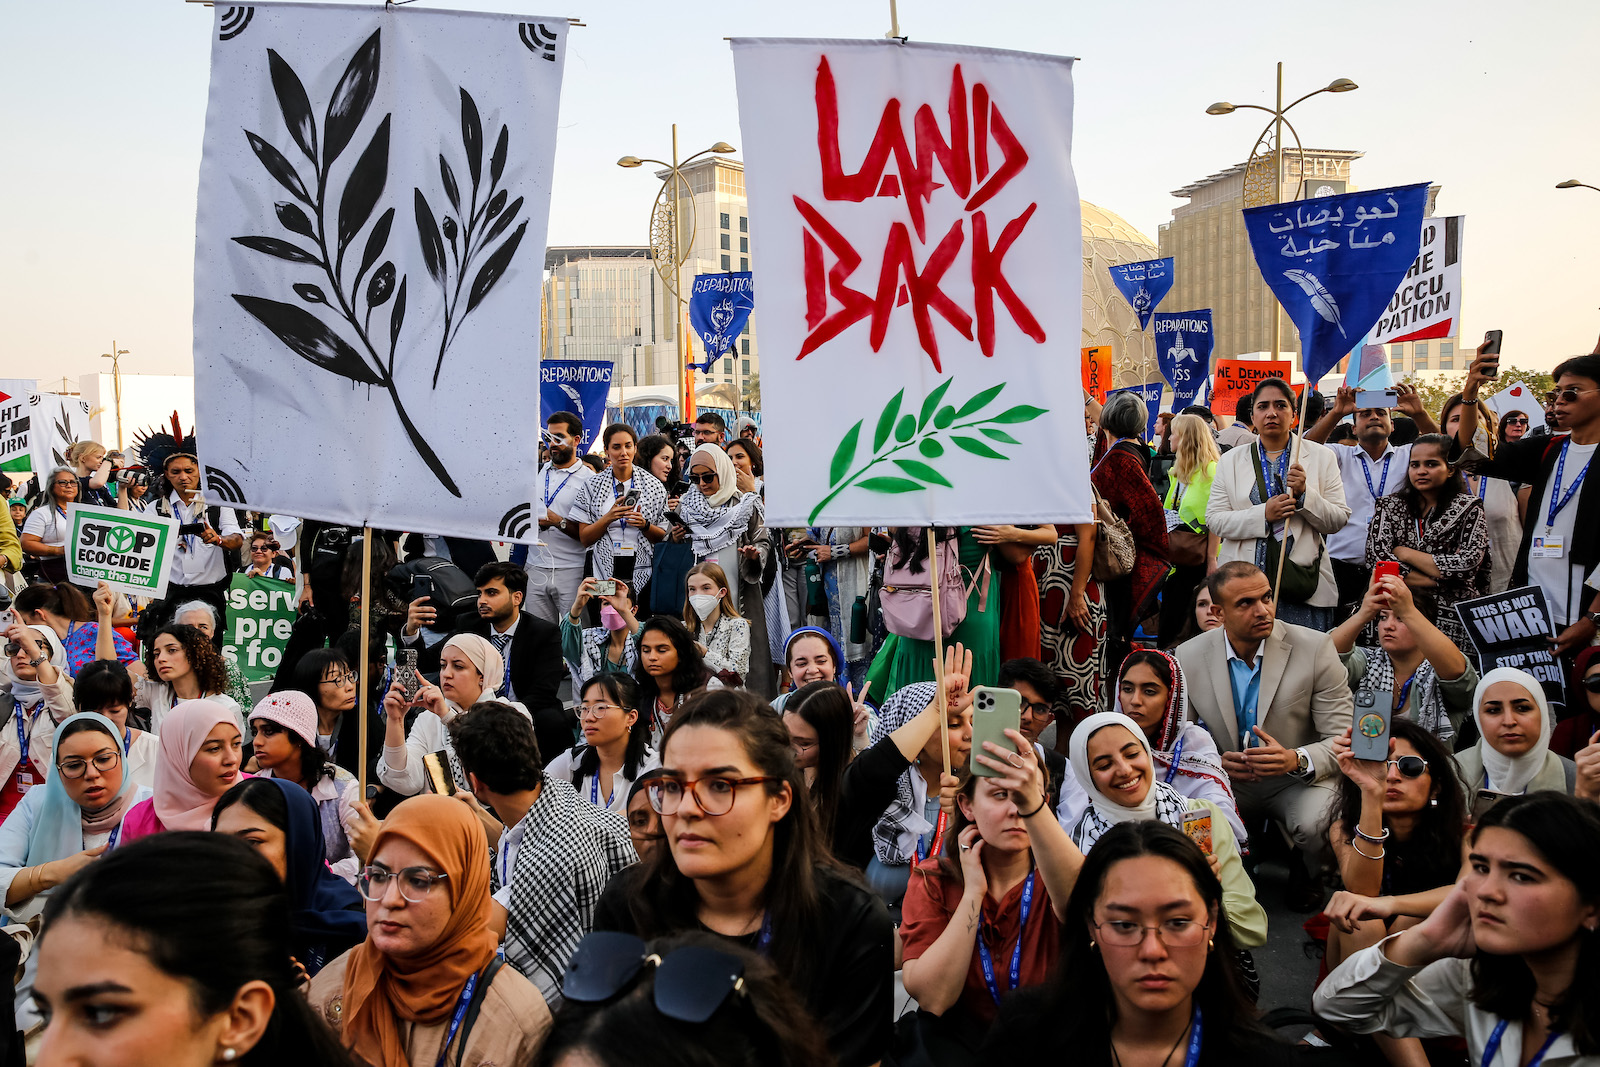 A large group of people hold signs with symbols and words including olive branches, arabic lettering, and 'land back' on them